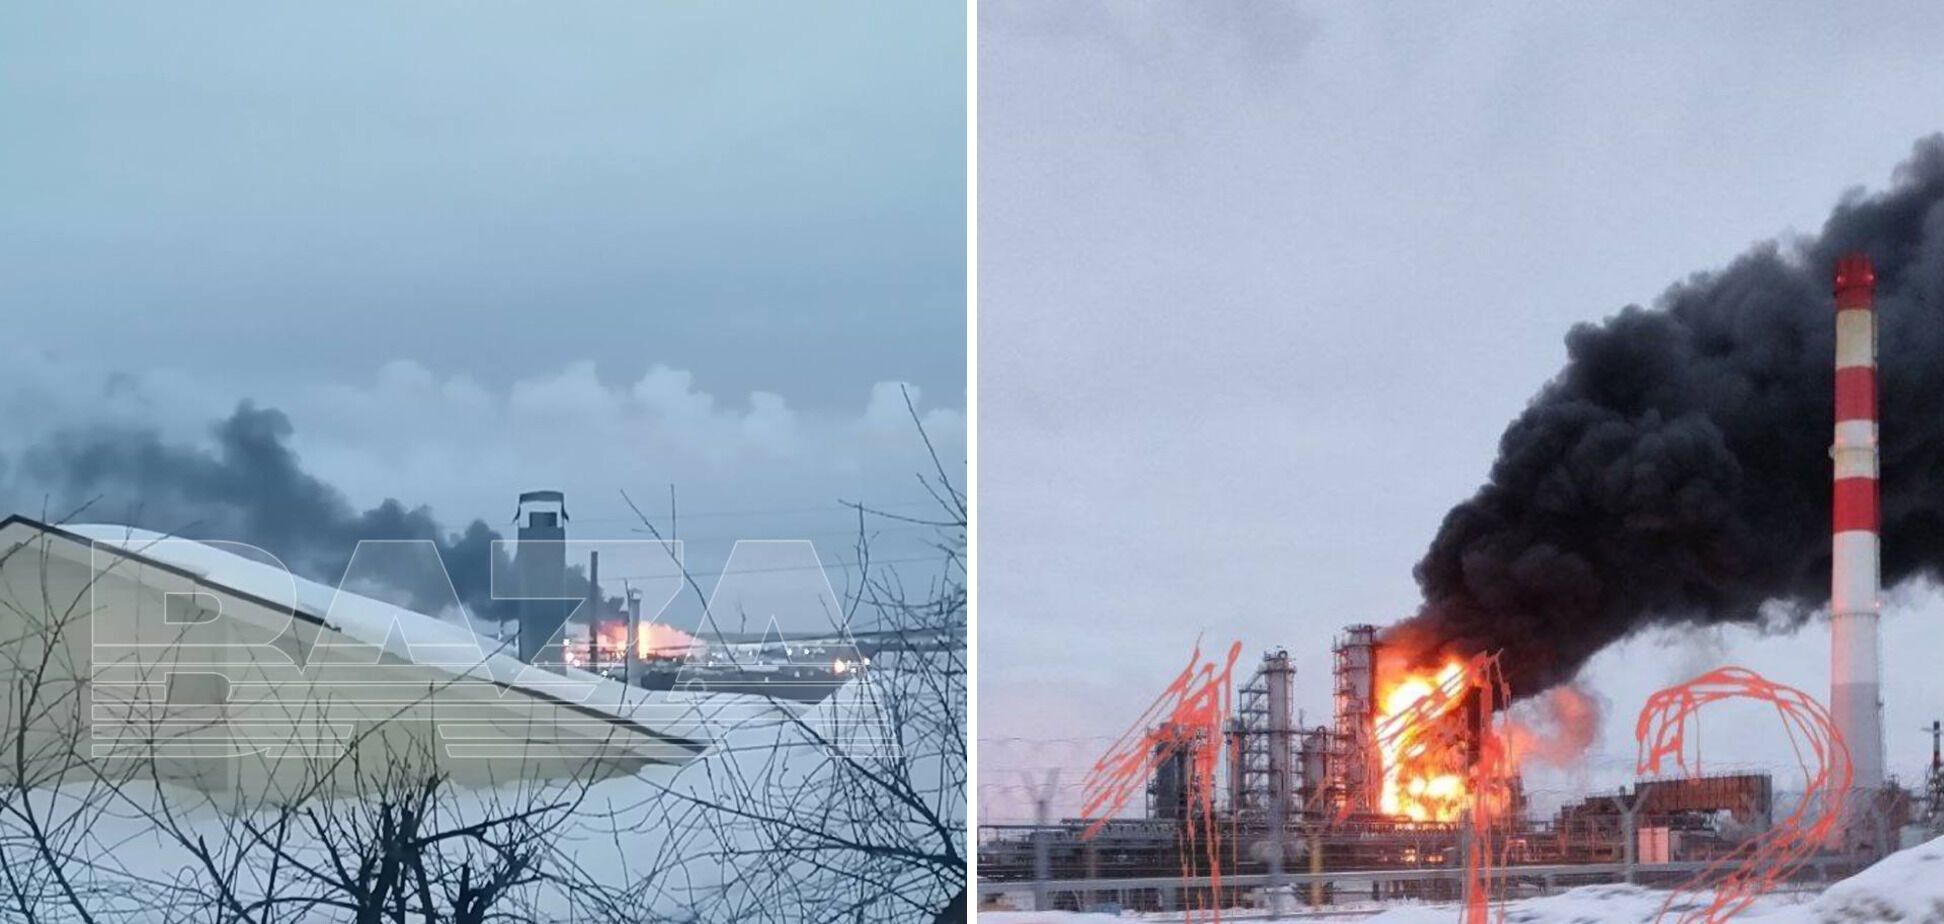 A pillar of fire and black smoke rose: photos of a powerful fire at the Lukoil refinery in Russia after a drone attack appeared